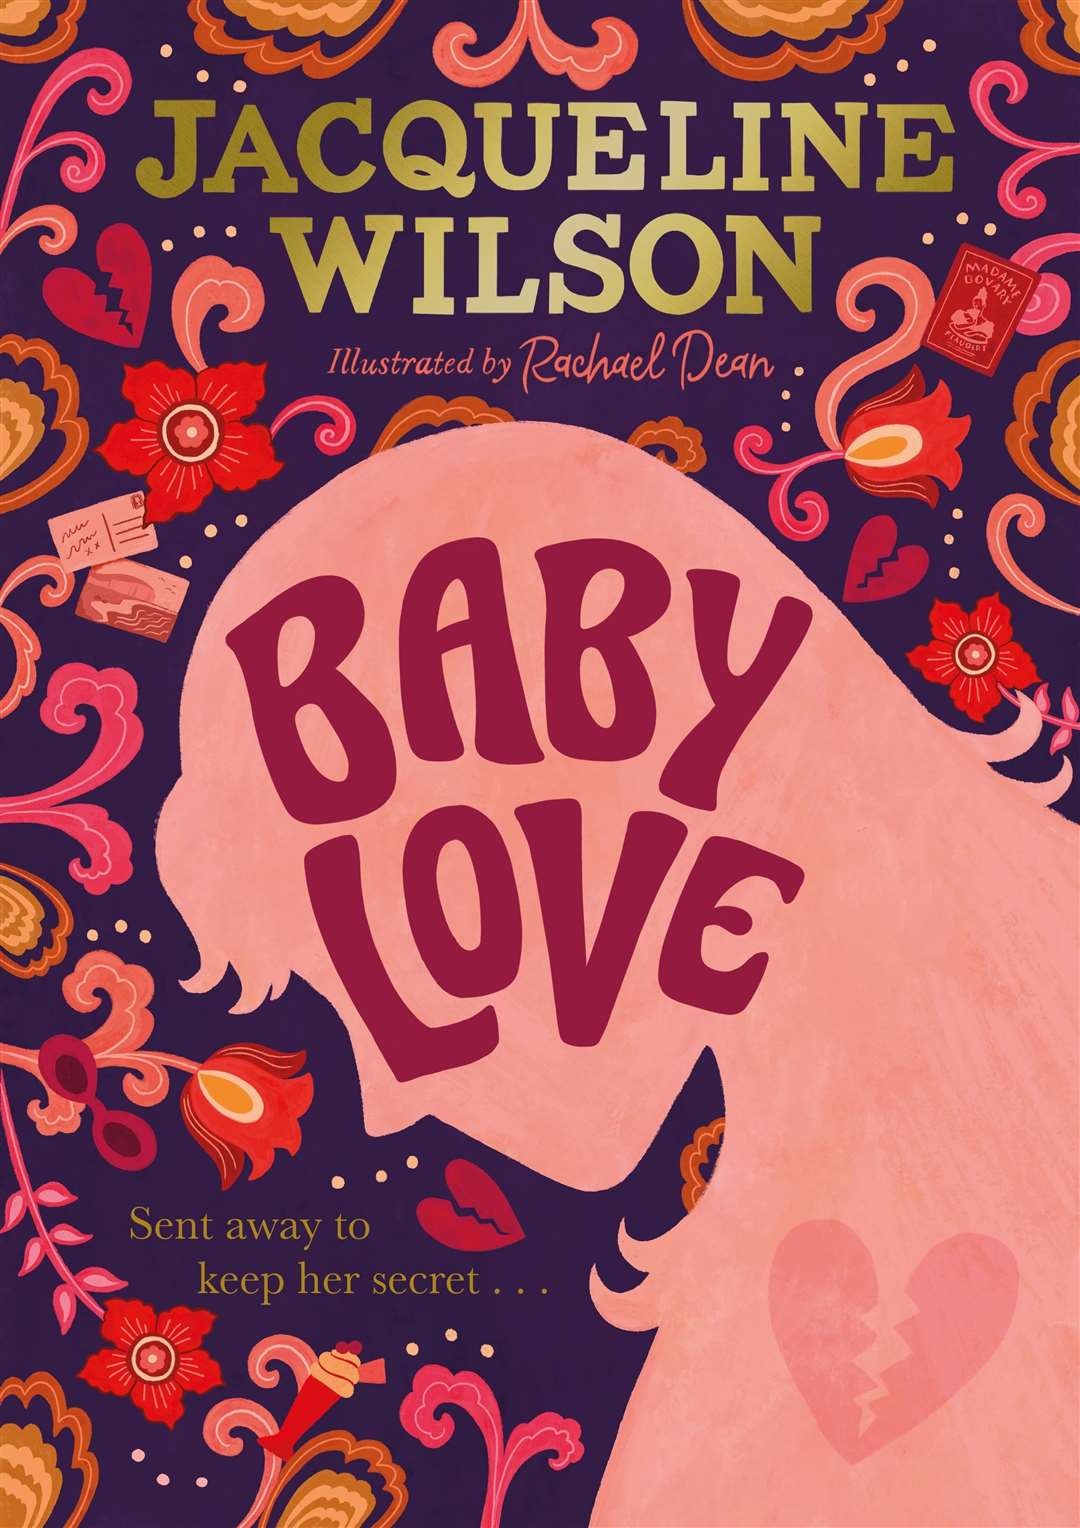 Baby Love by Jacqueline Wilson.